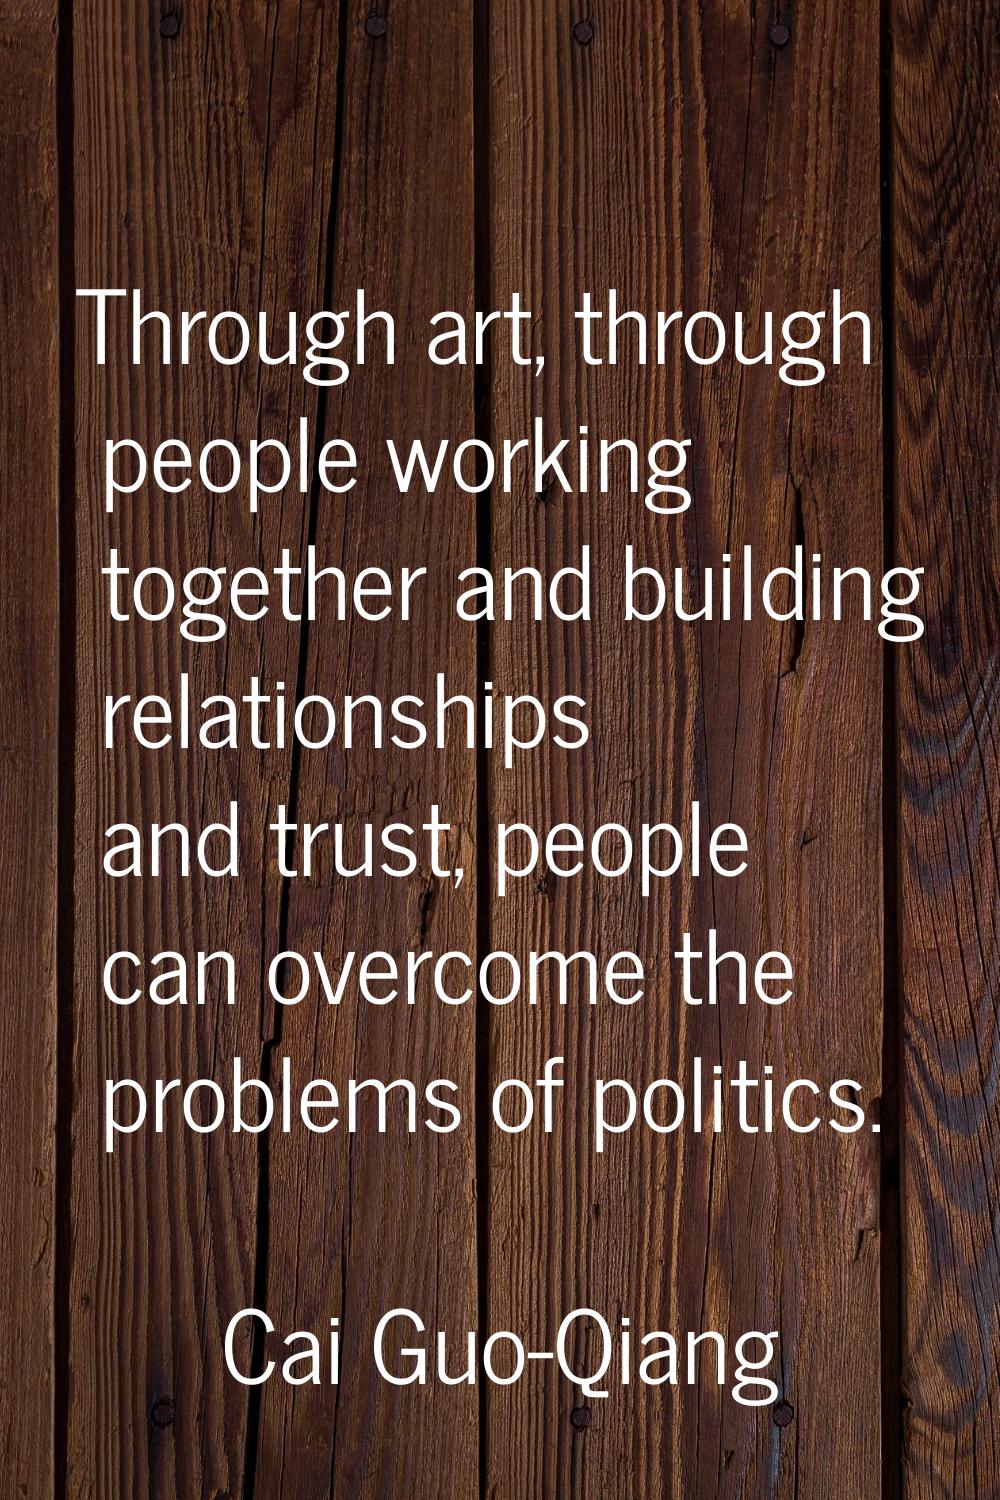 Through art, through people working together and building relationships and trust, people can overc